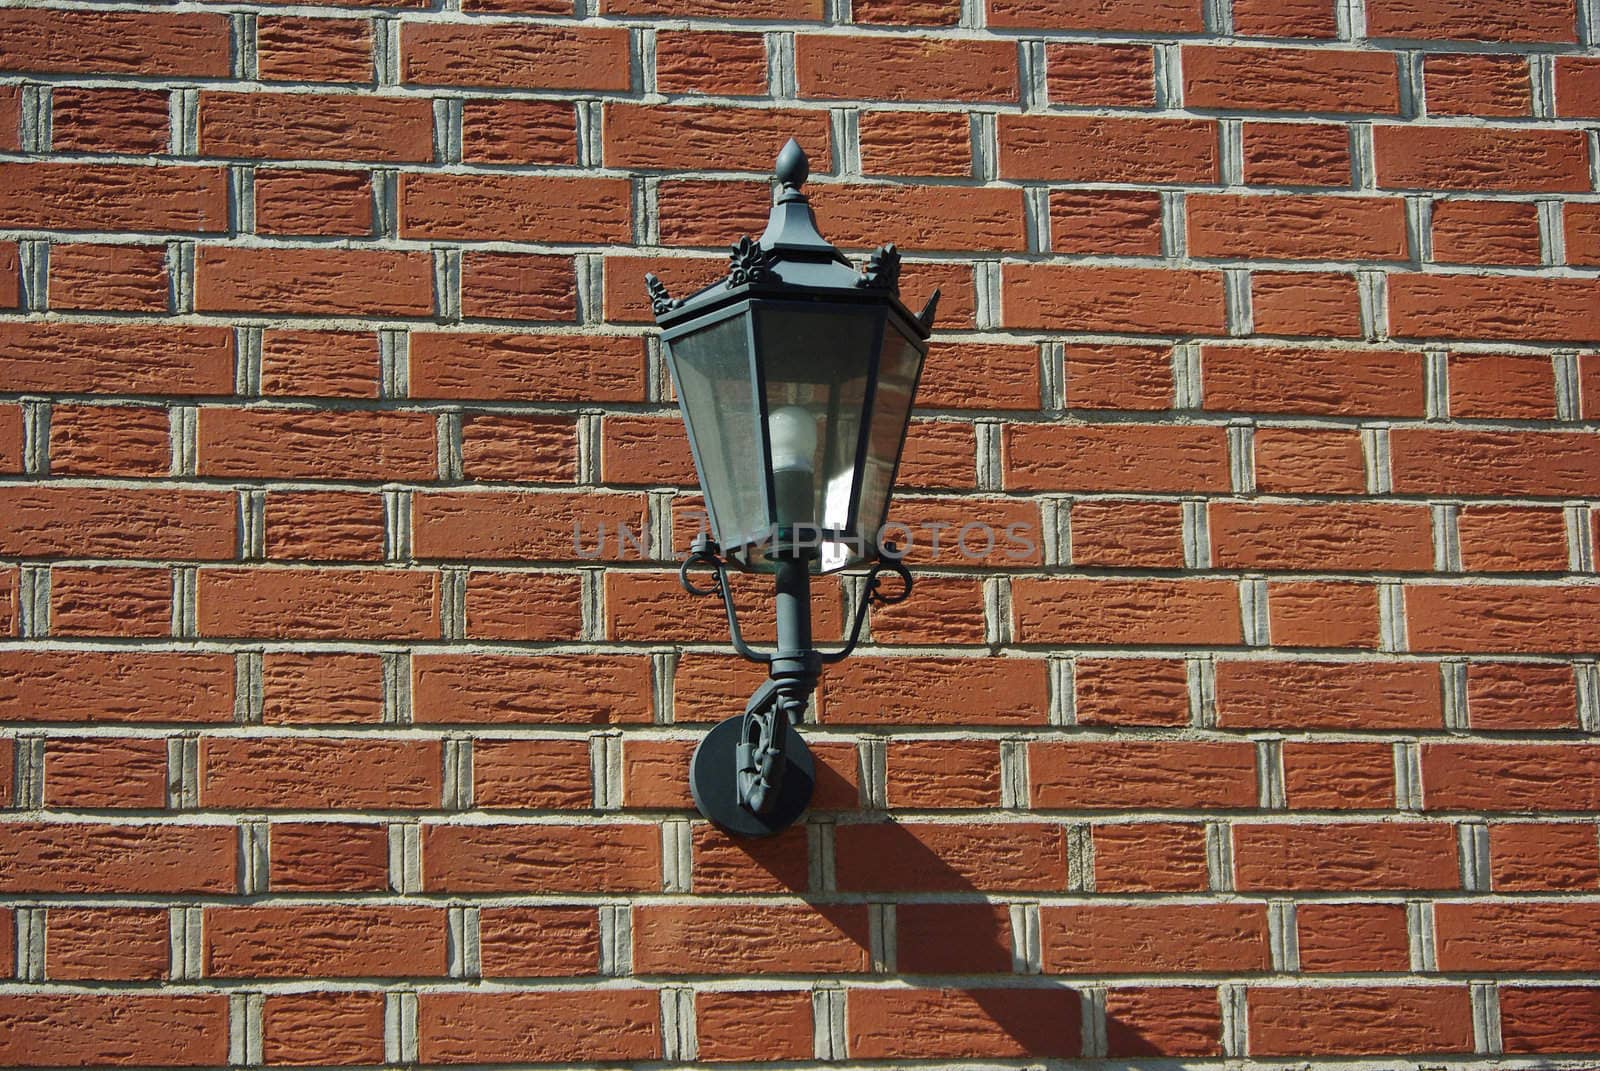 A brass quadrilateral stylish lantern attached to a brick wall.